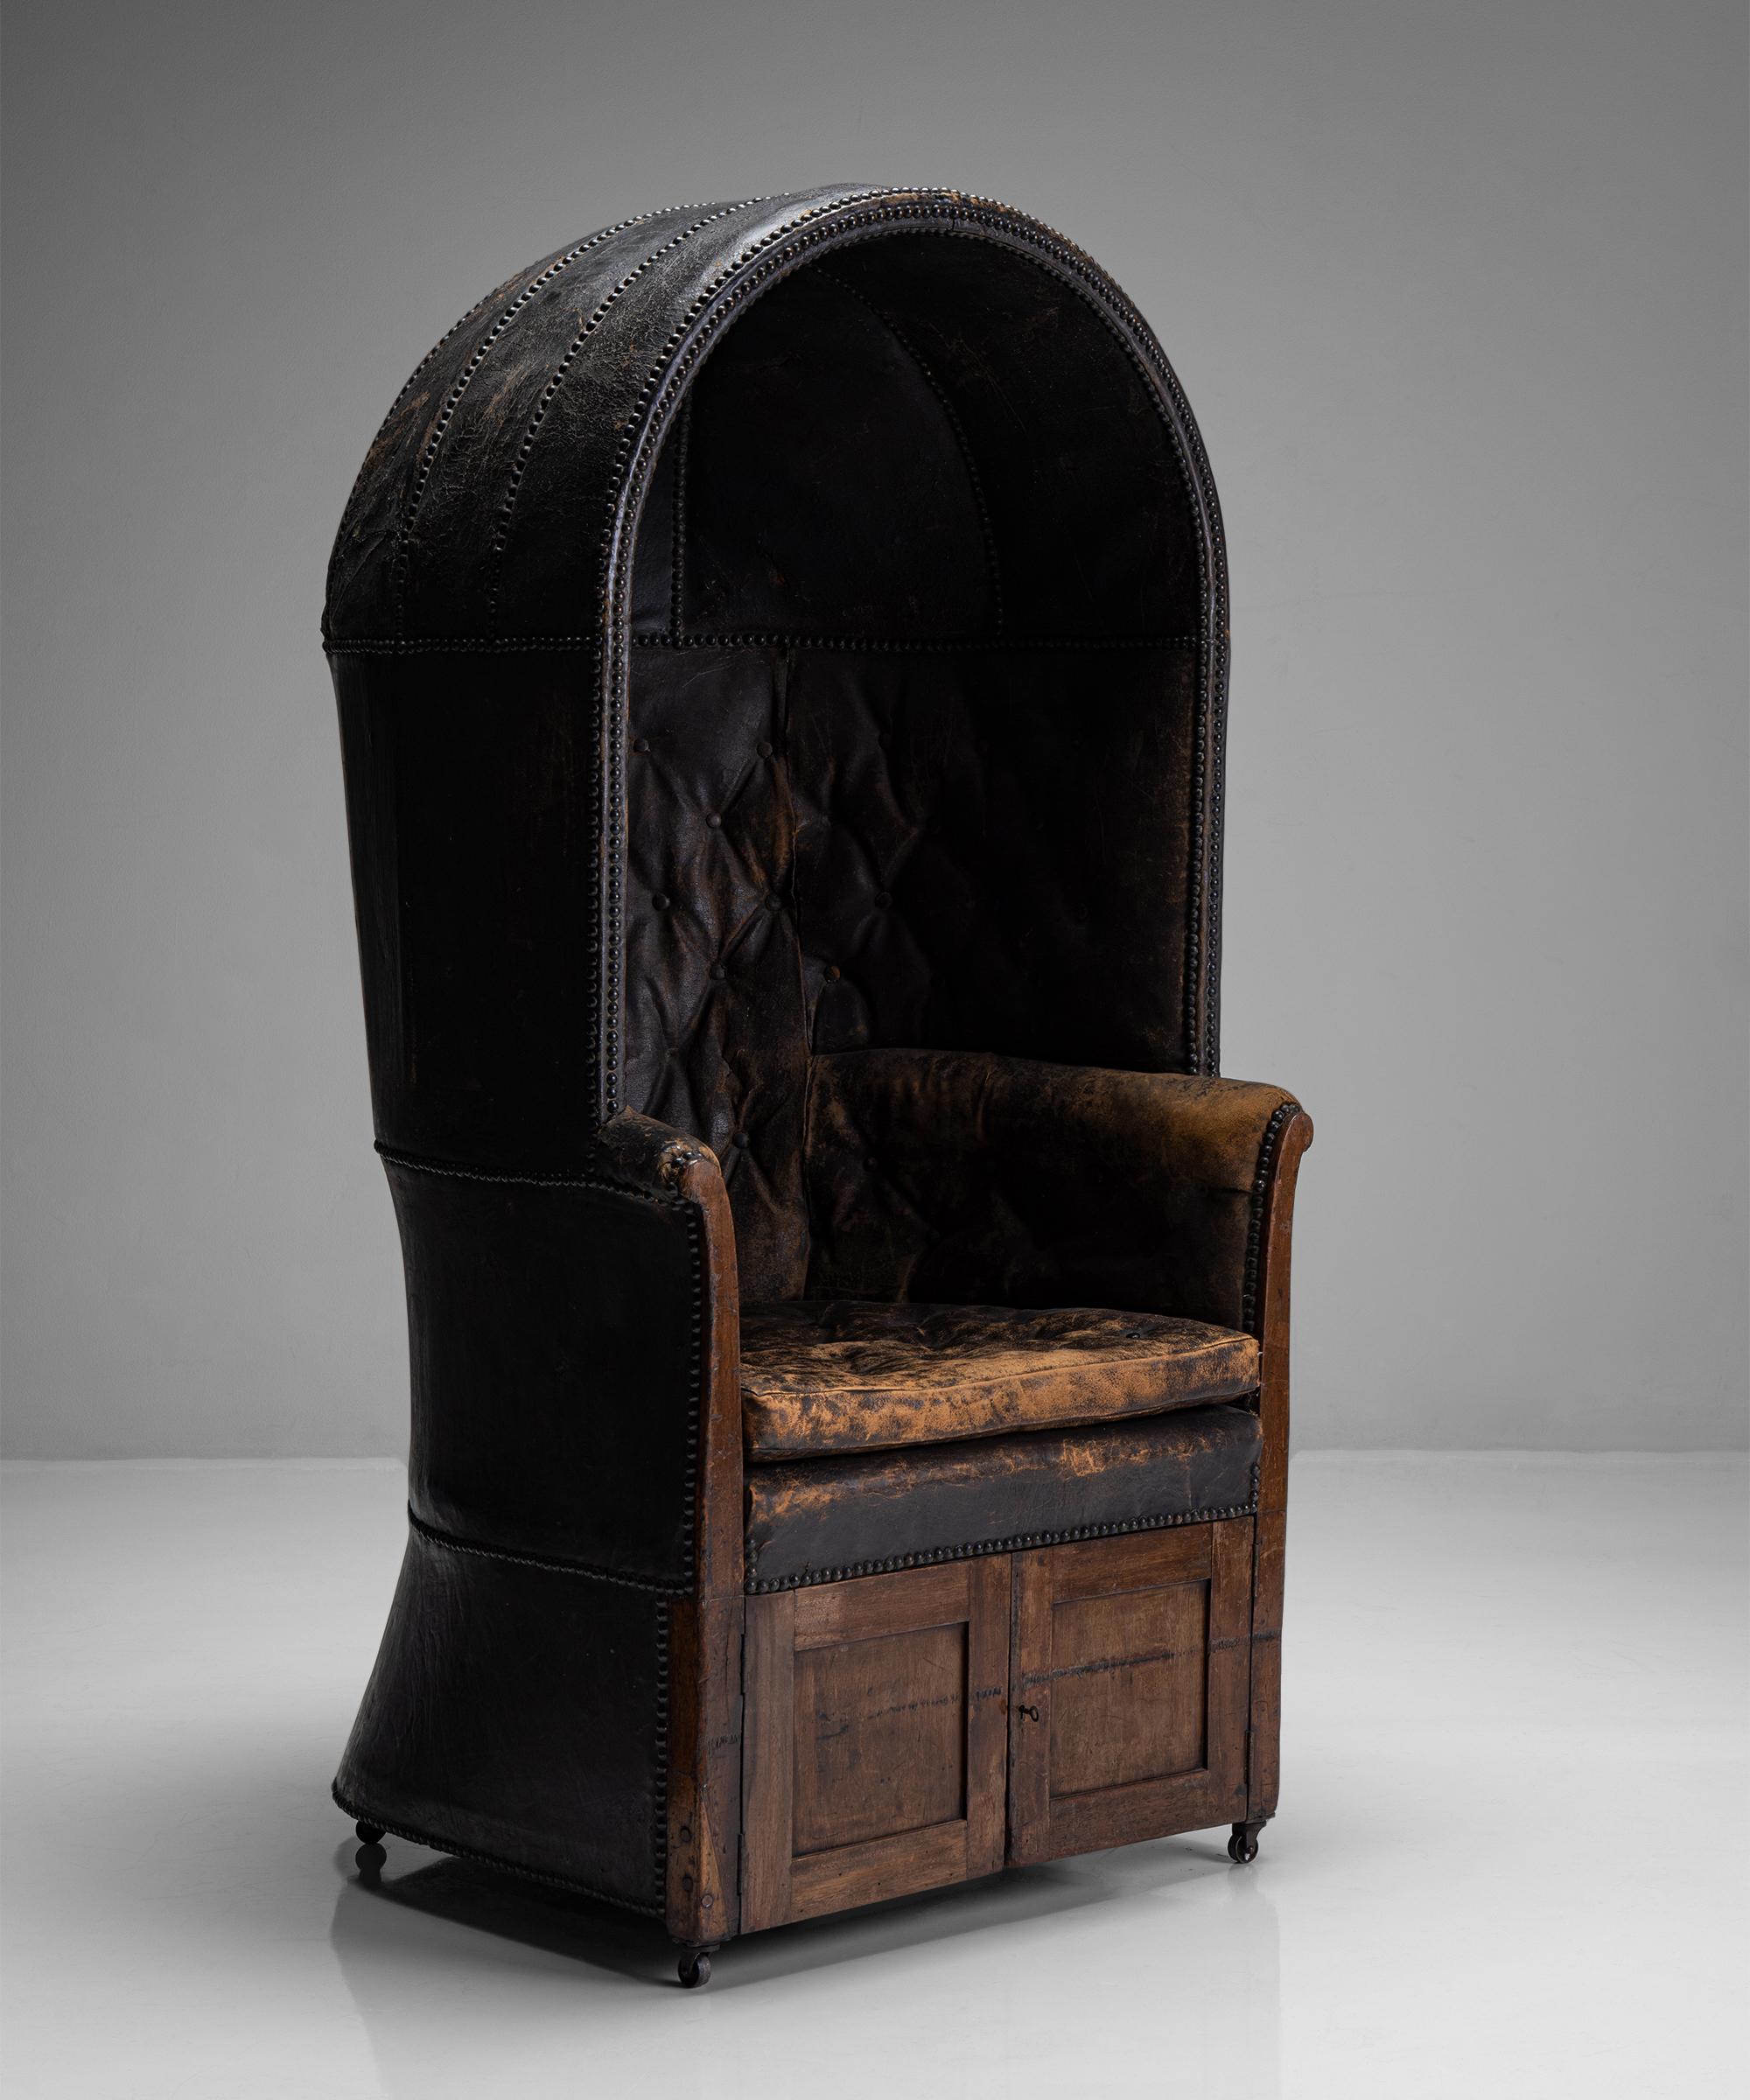 Georgian Hall Porter’s Chair

England circa 1820

Superb and in untouched condition with mahogany and leather.